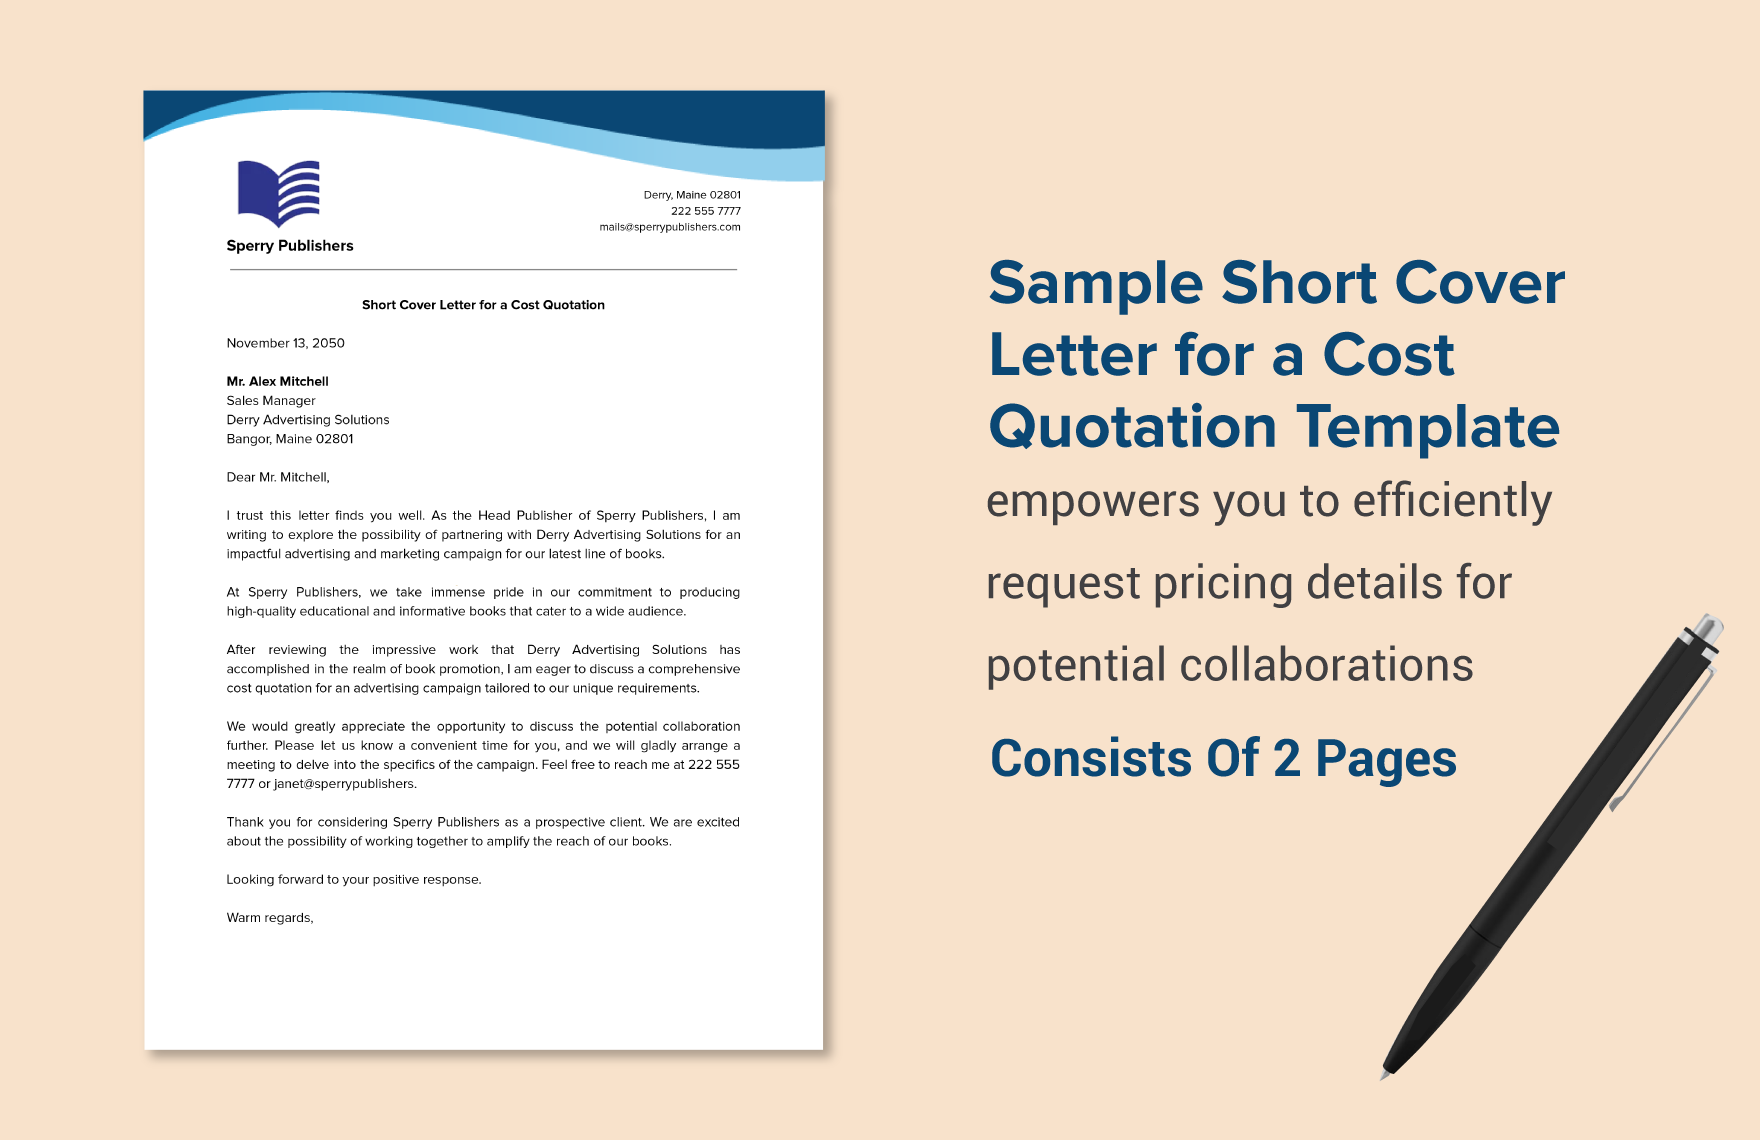 sample-short-cover-letter-for-a-cost-quotation